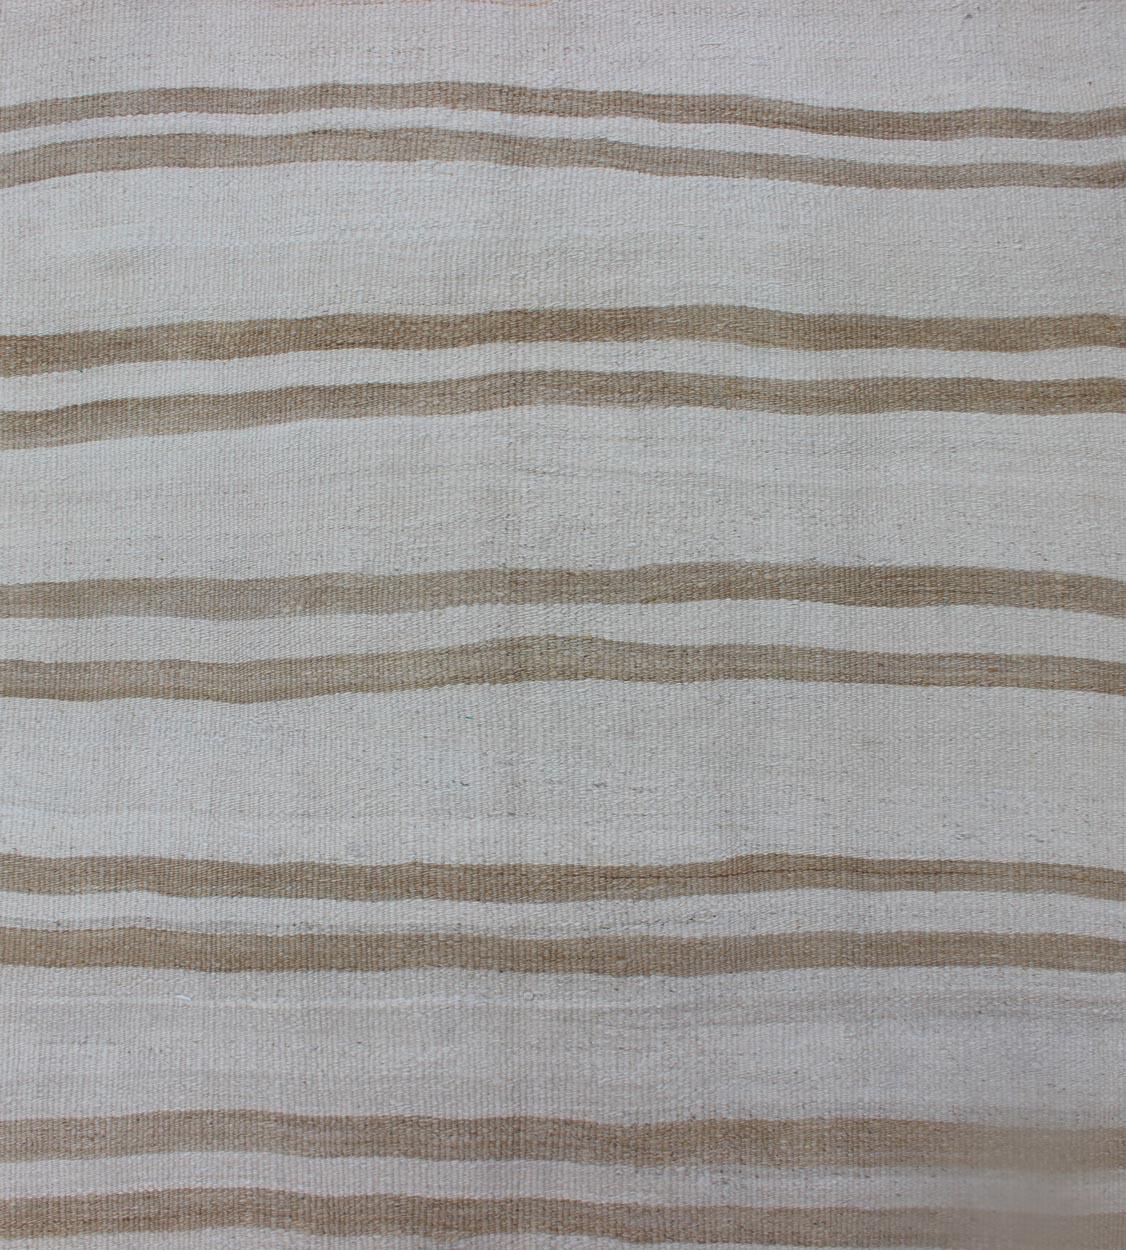 Wool Vintage Turkish Kilim Runner with Stripe Design in Light Brown and Cream Tones For Sale